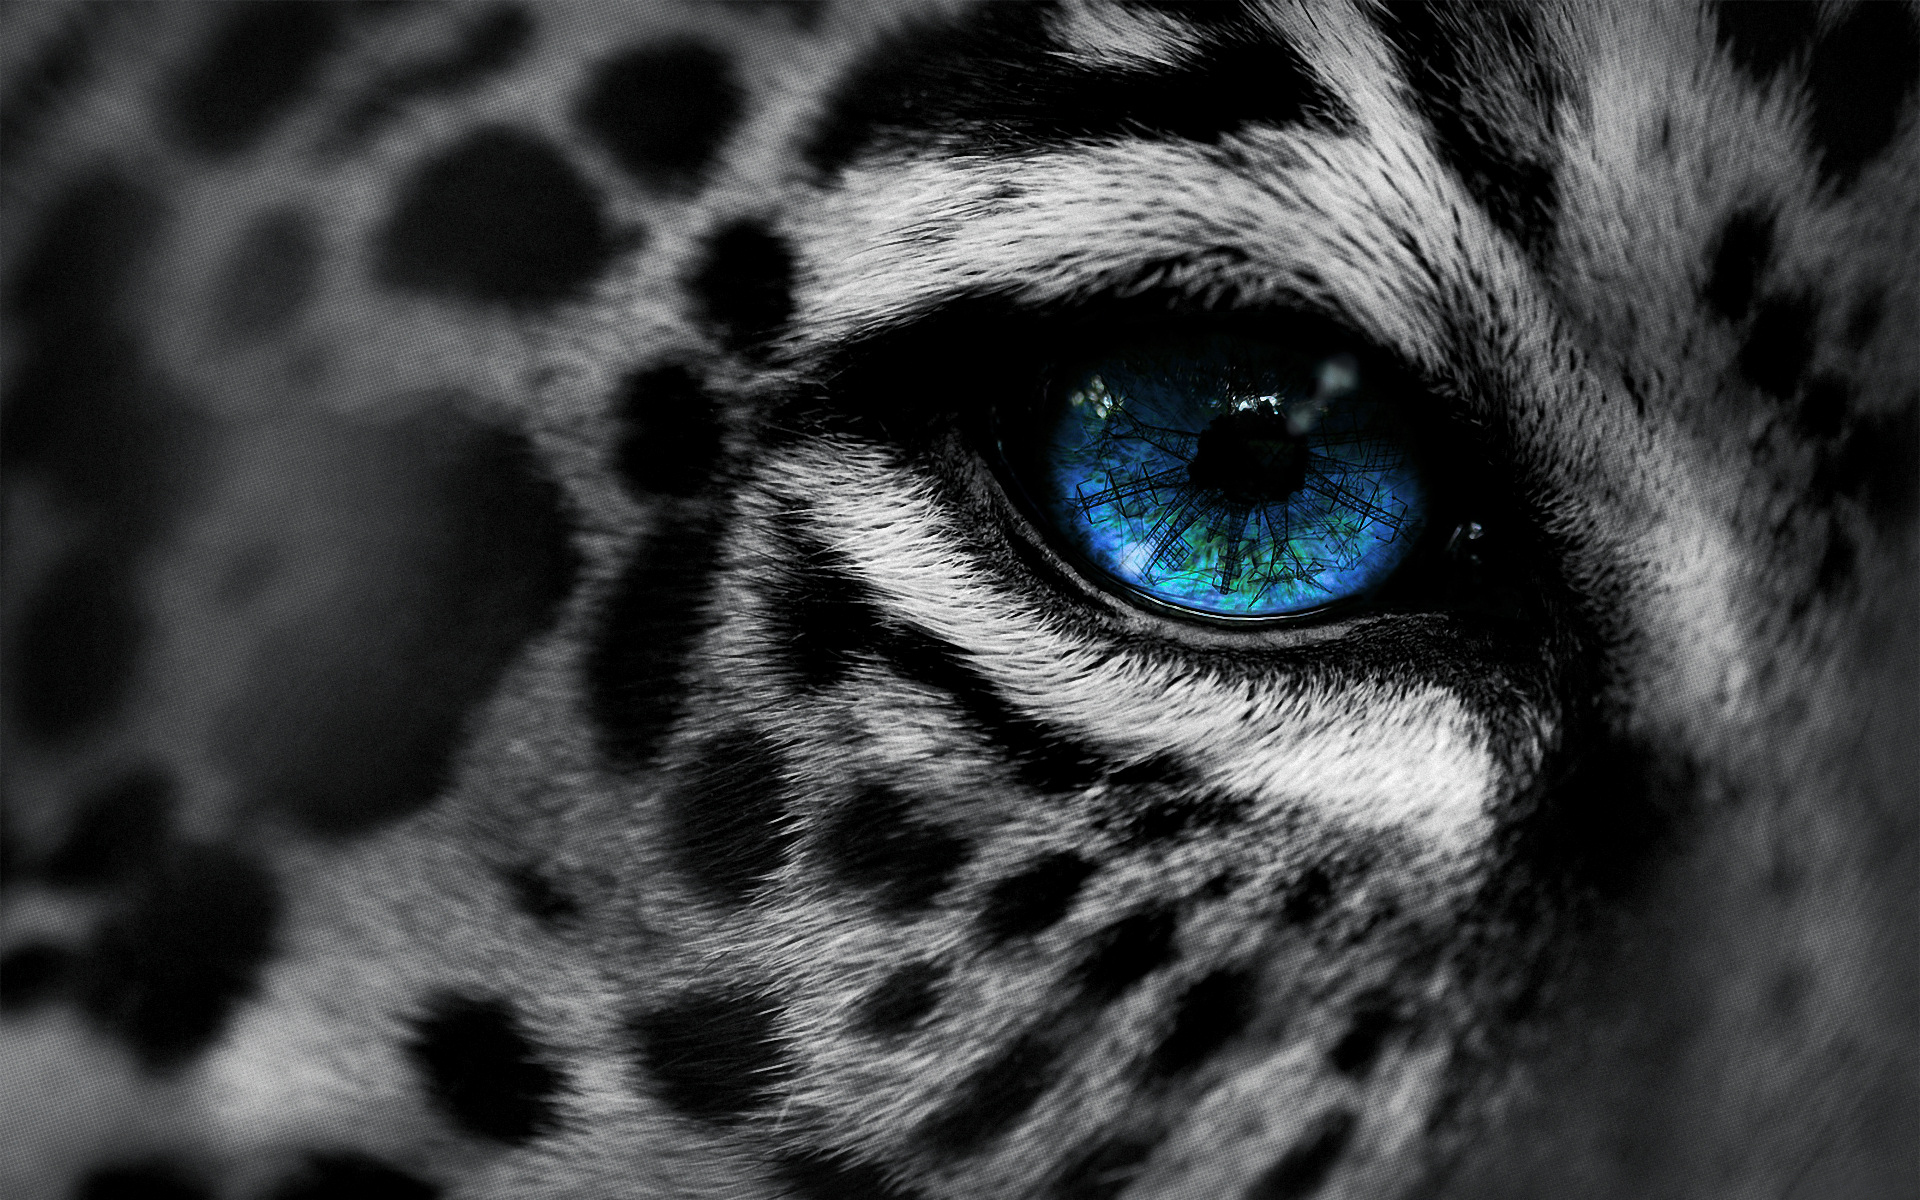 Free Leopard Backgrounds 18414 1920x1200 px. Category: Animals Resolution: 1920x1200px. Filesize: 1.23 MB. Deer Wallpaper 12905